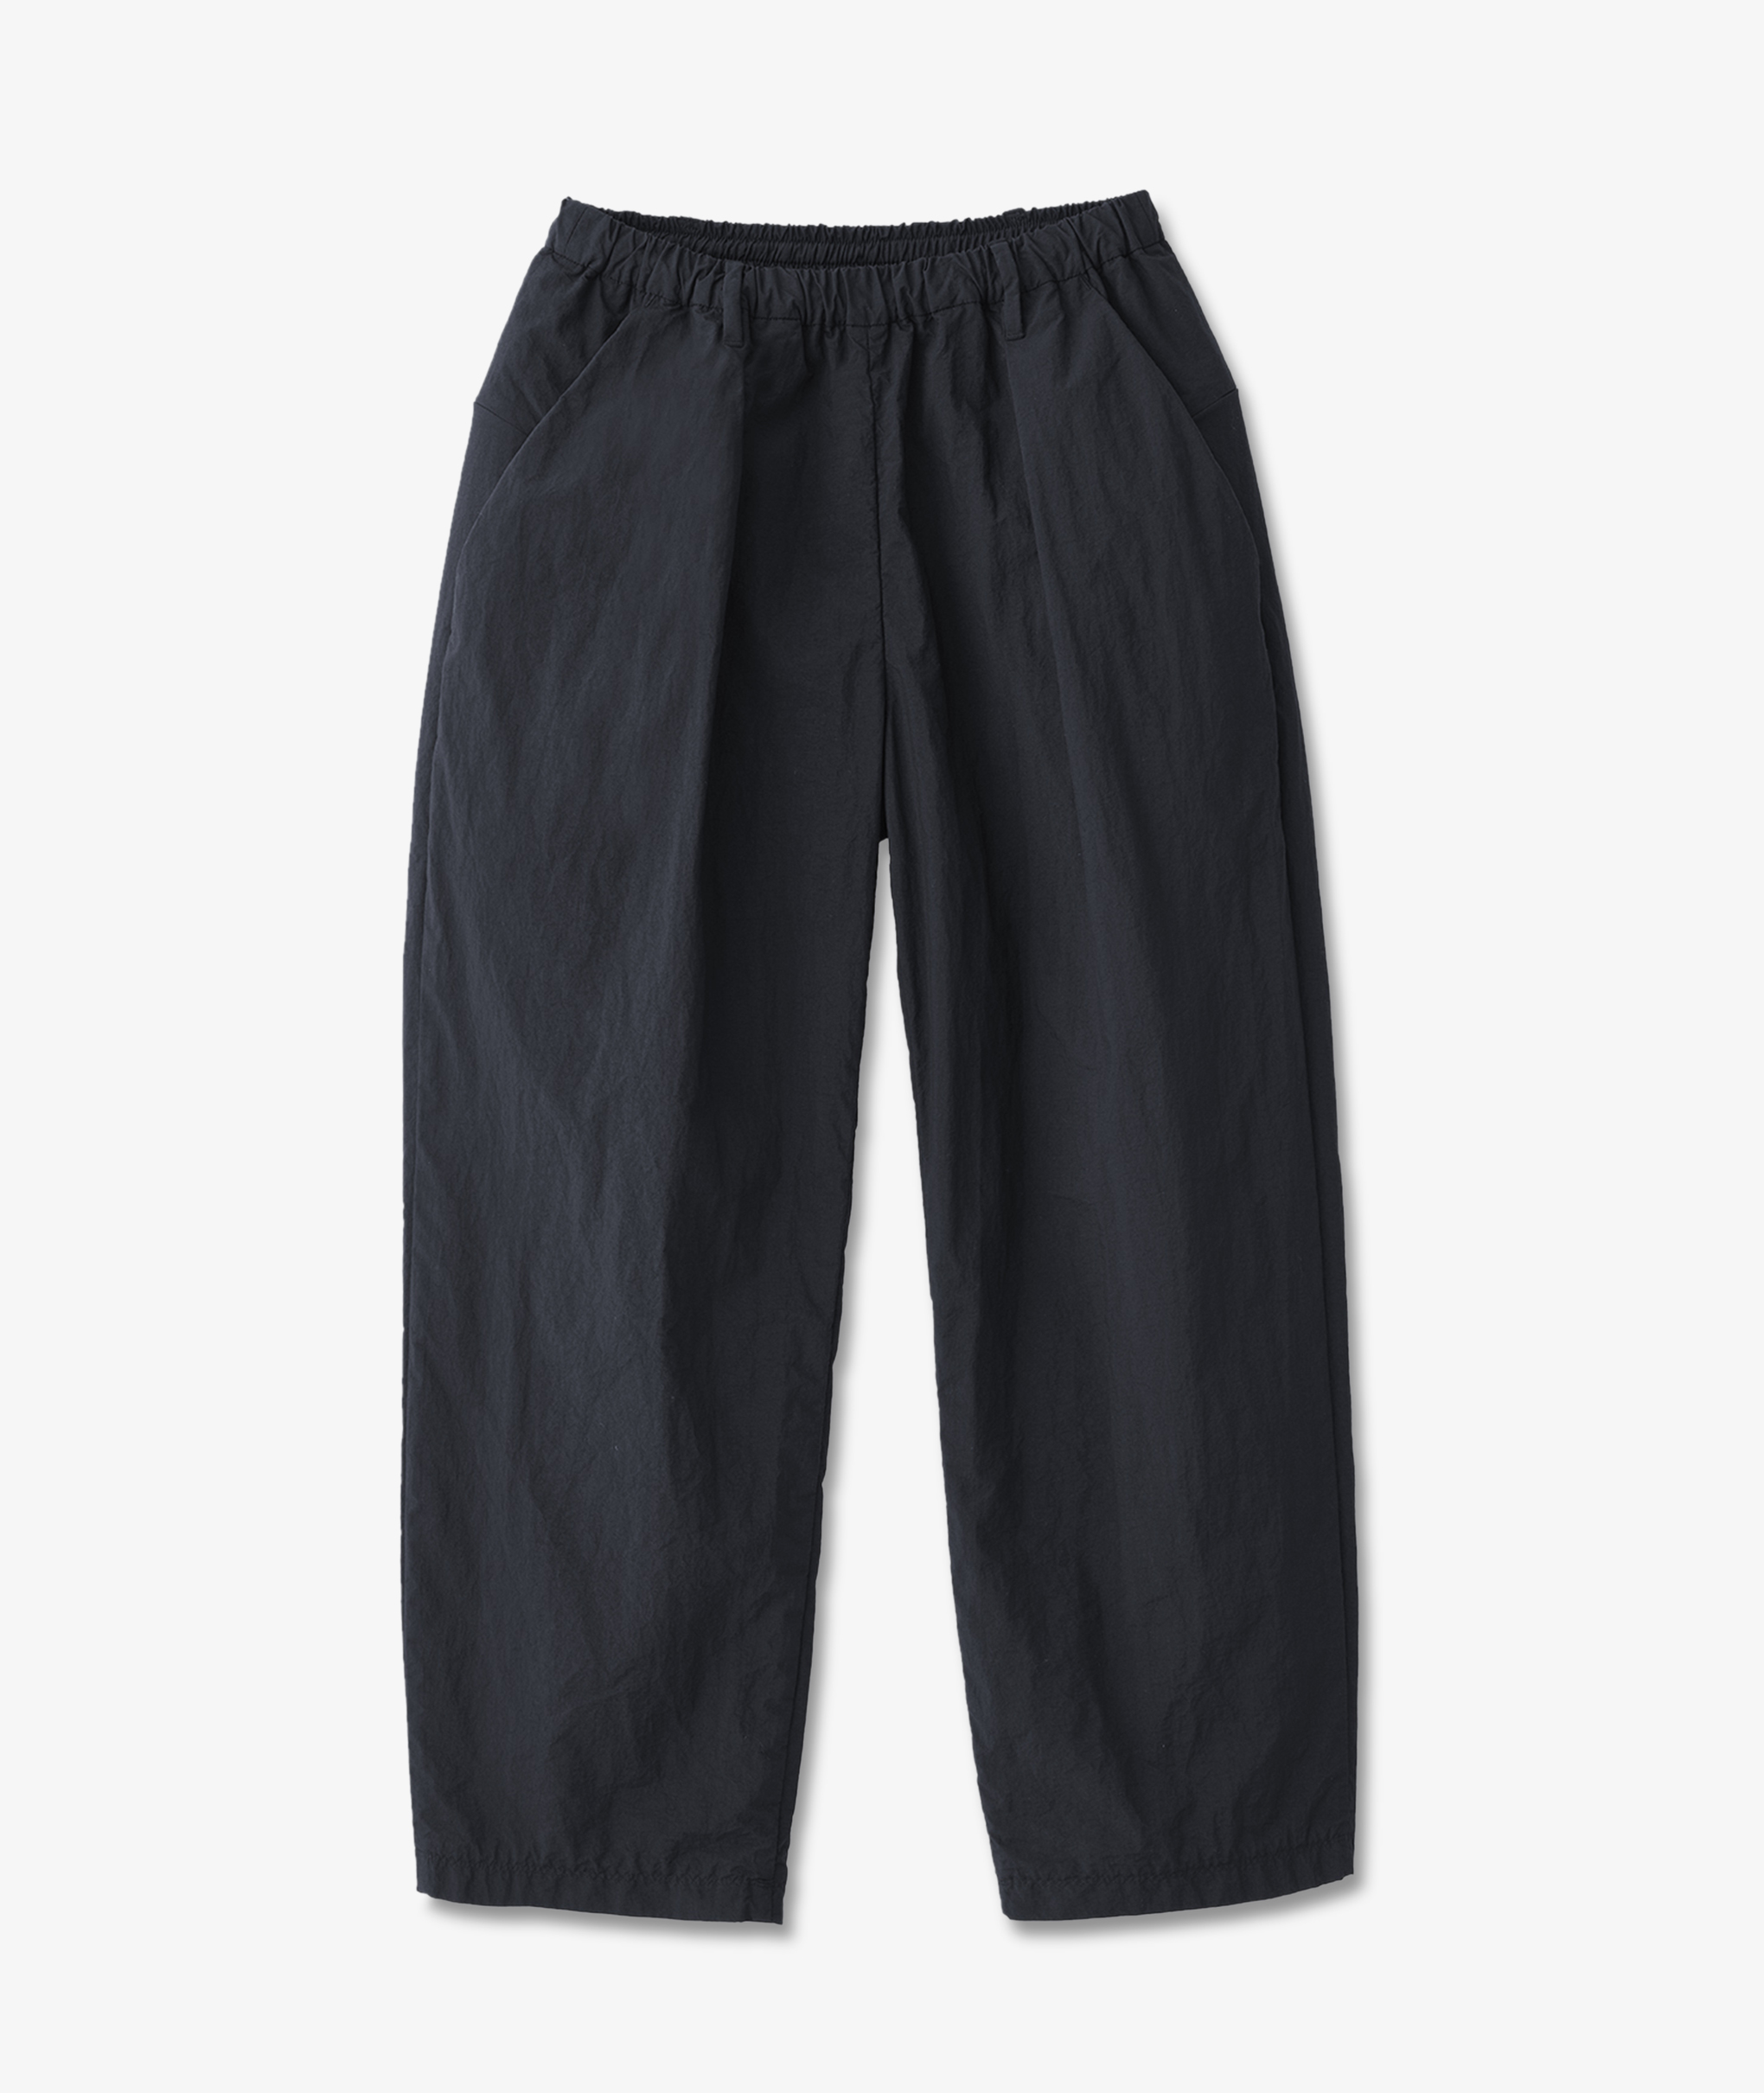 Norse Store  Shipping Worldwide - TEÄTORA Packable Wallet Pants